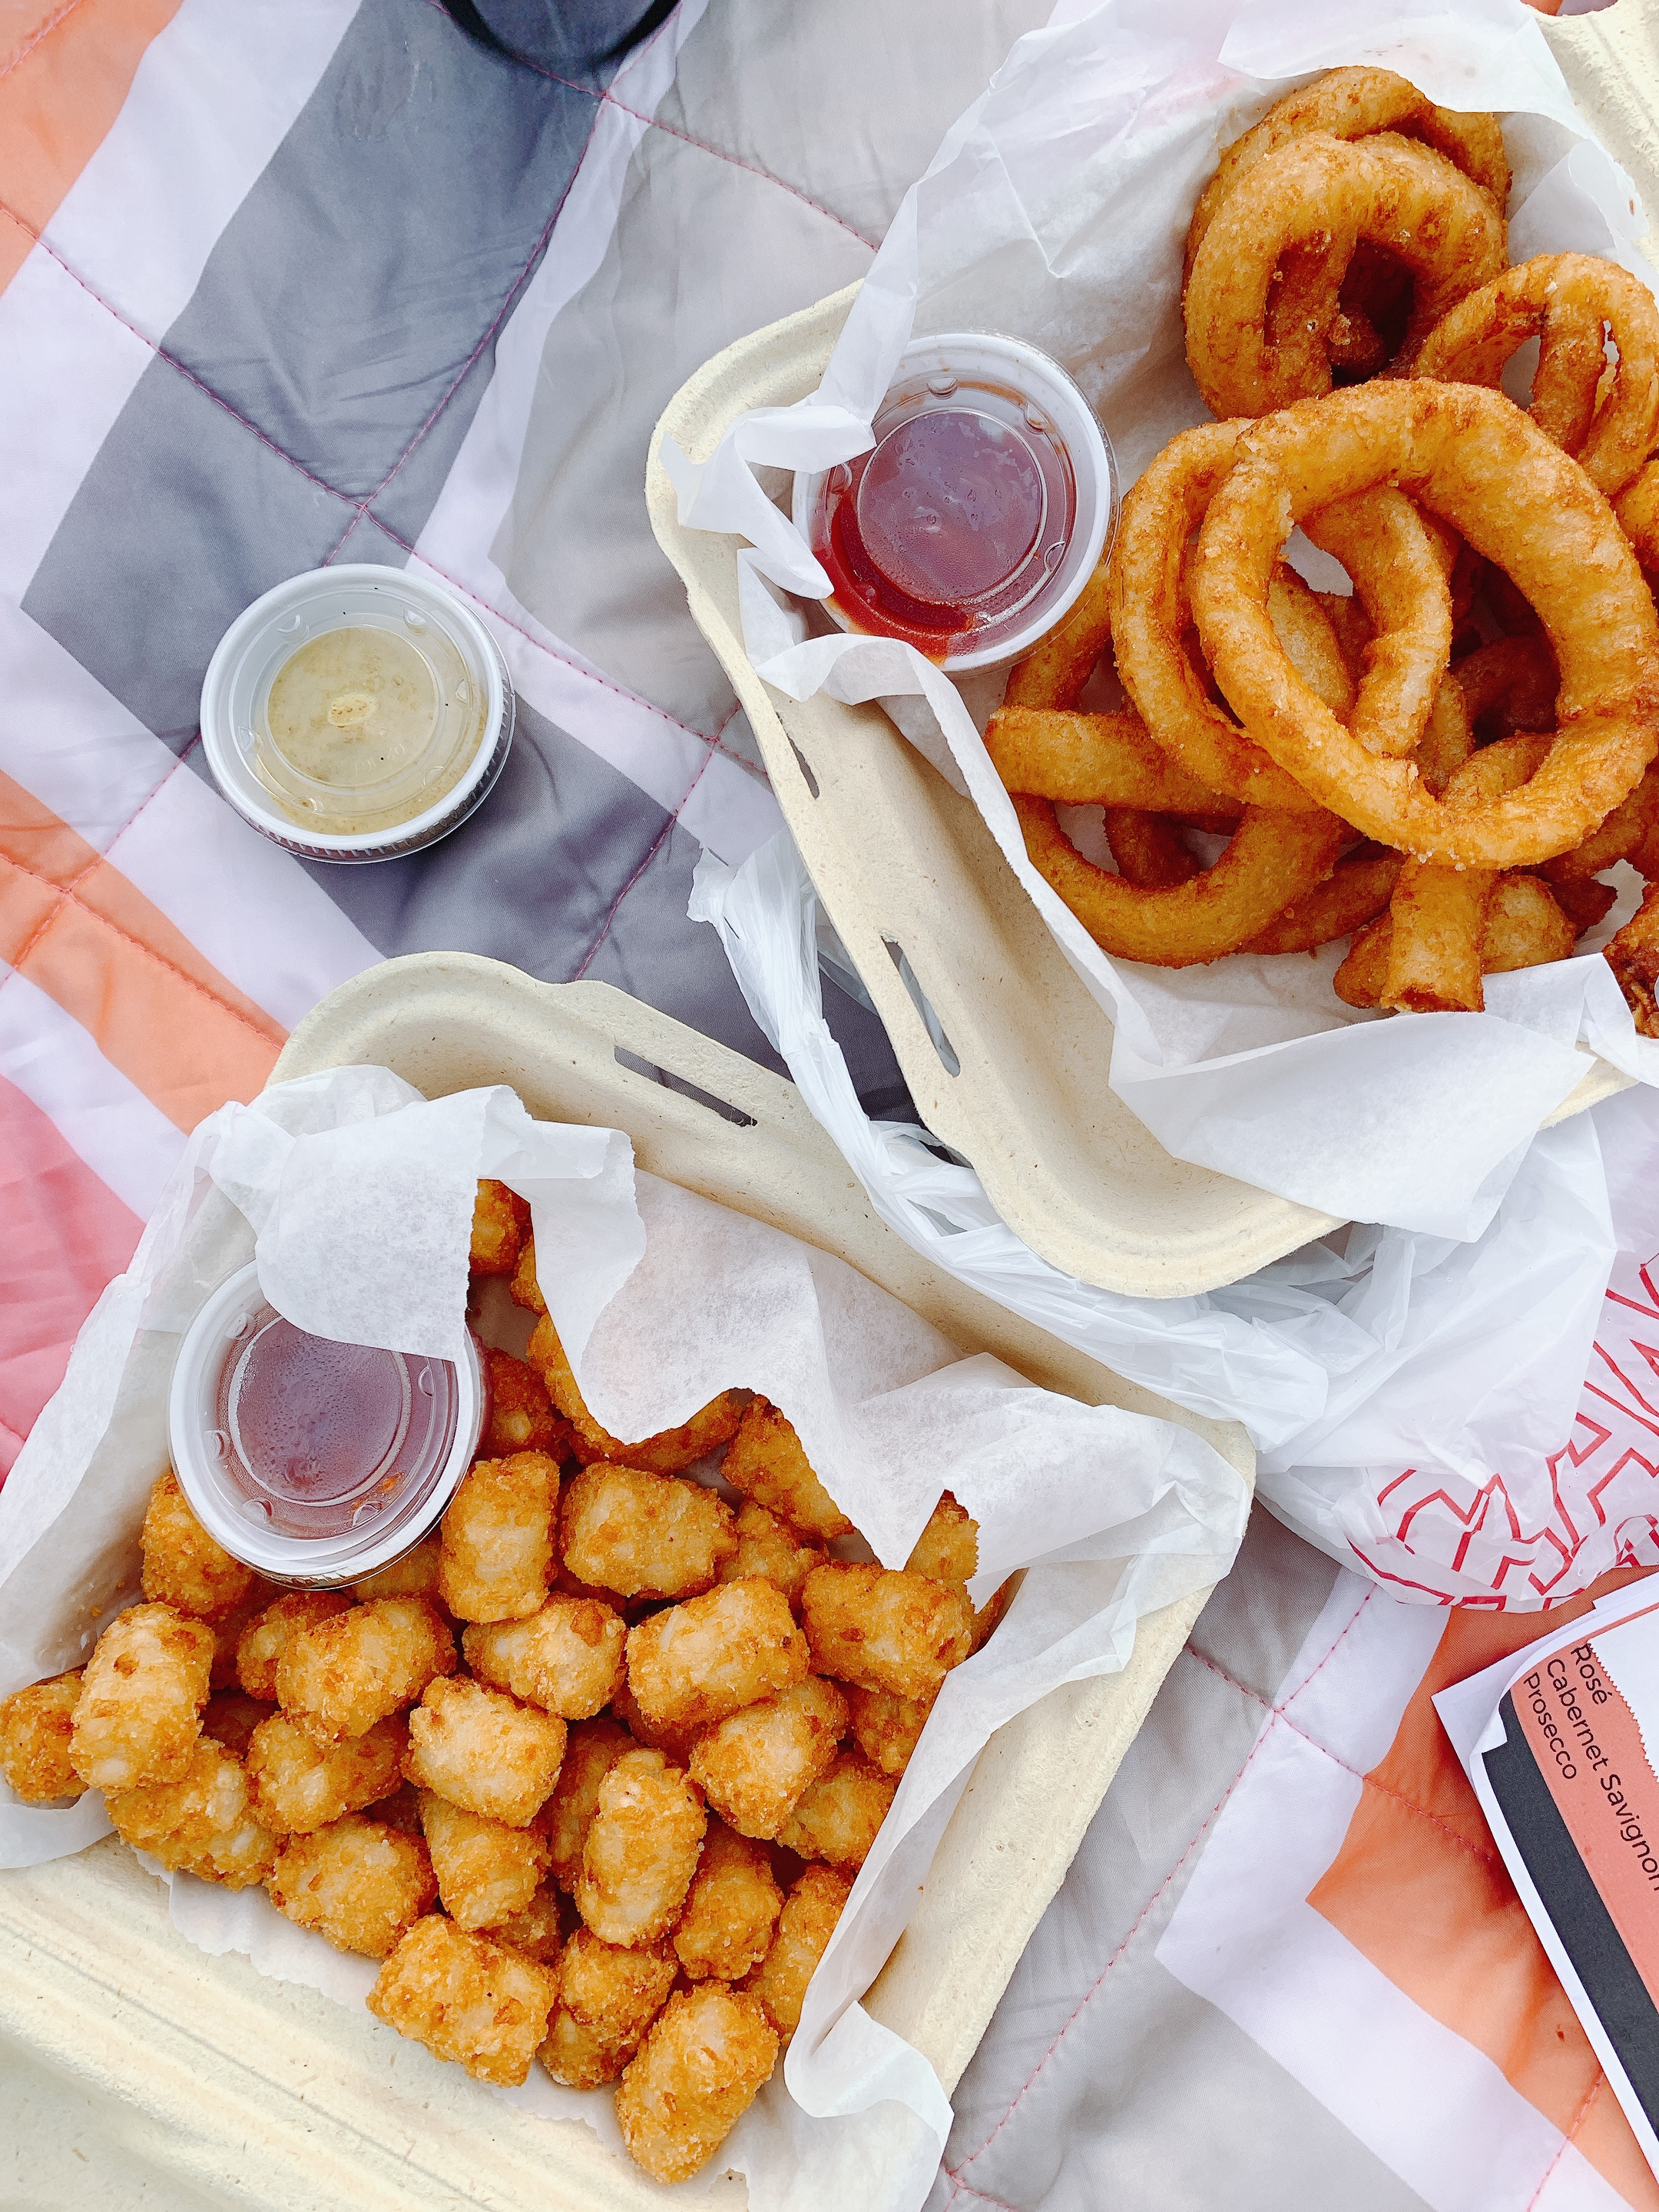 tater tots and onion rings